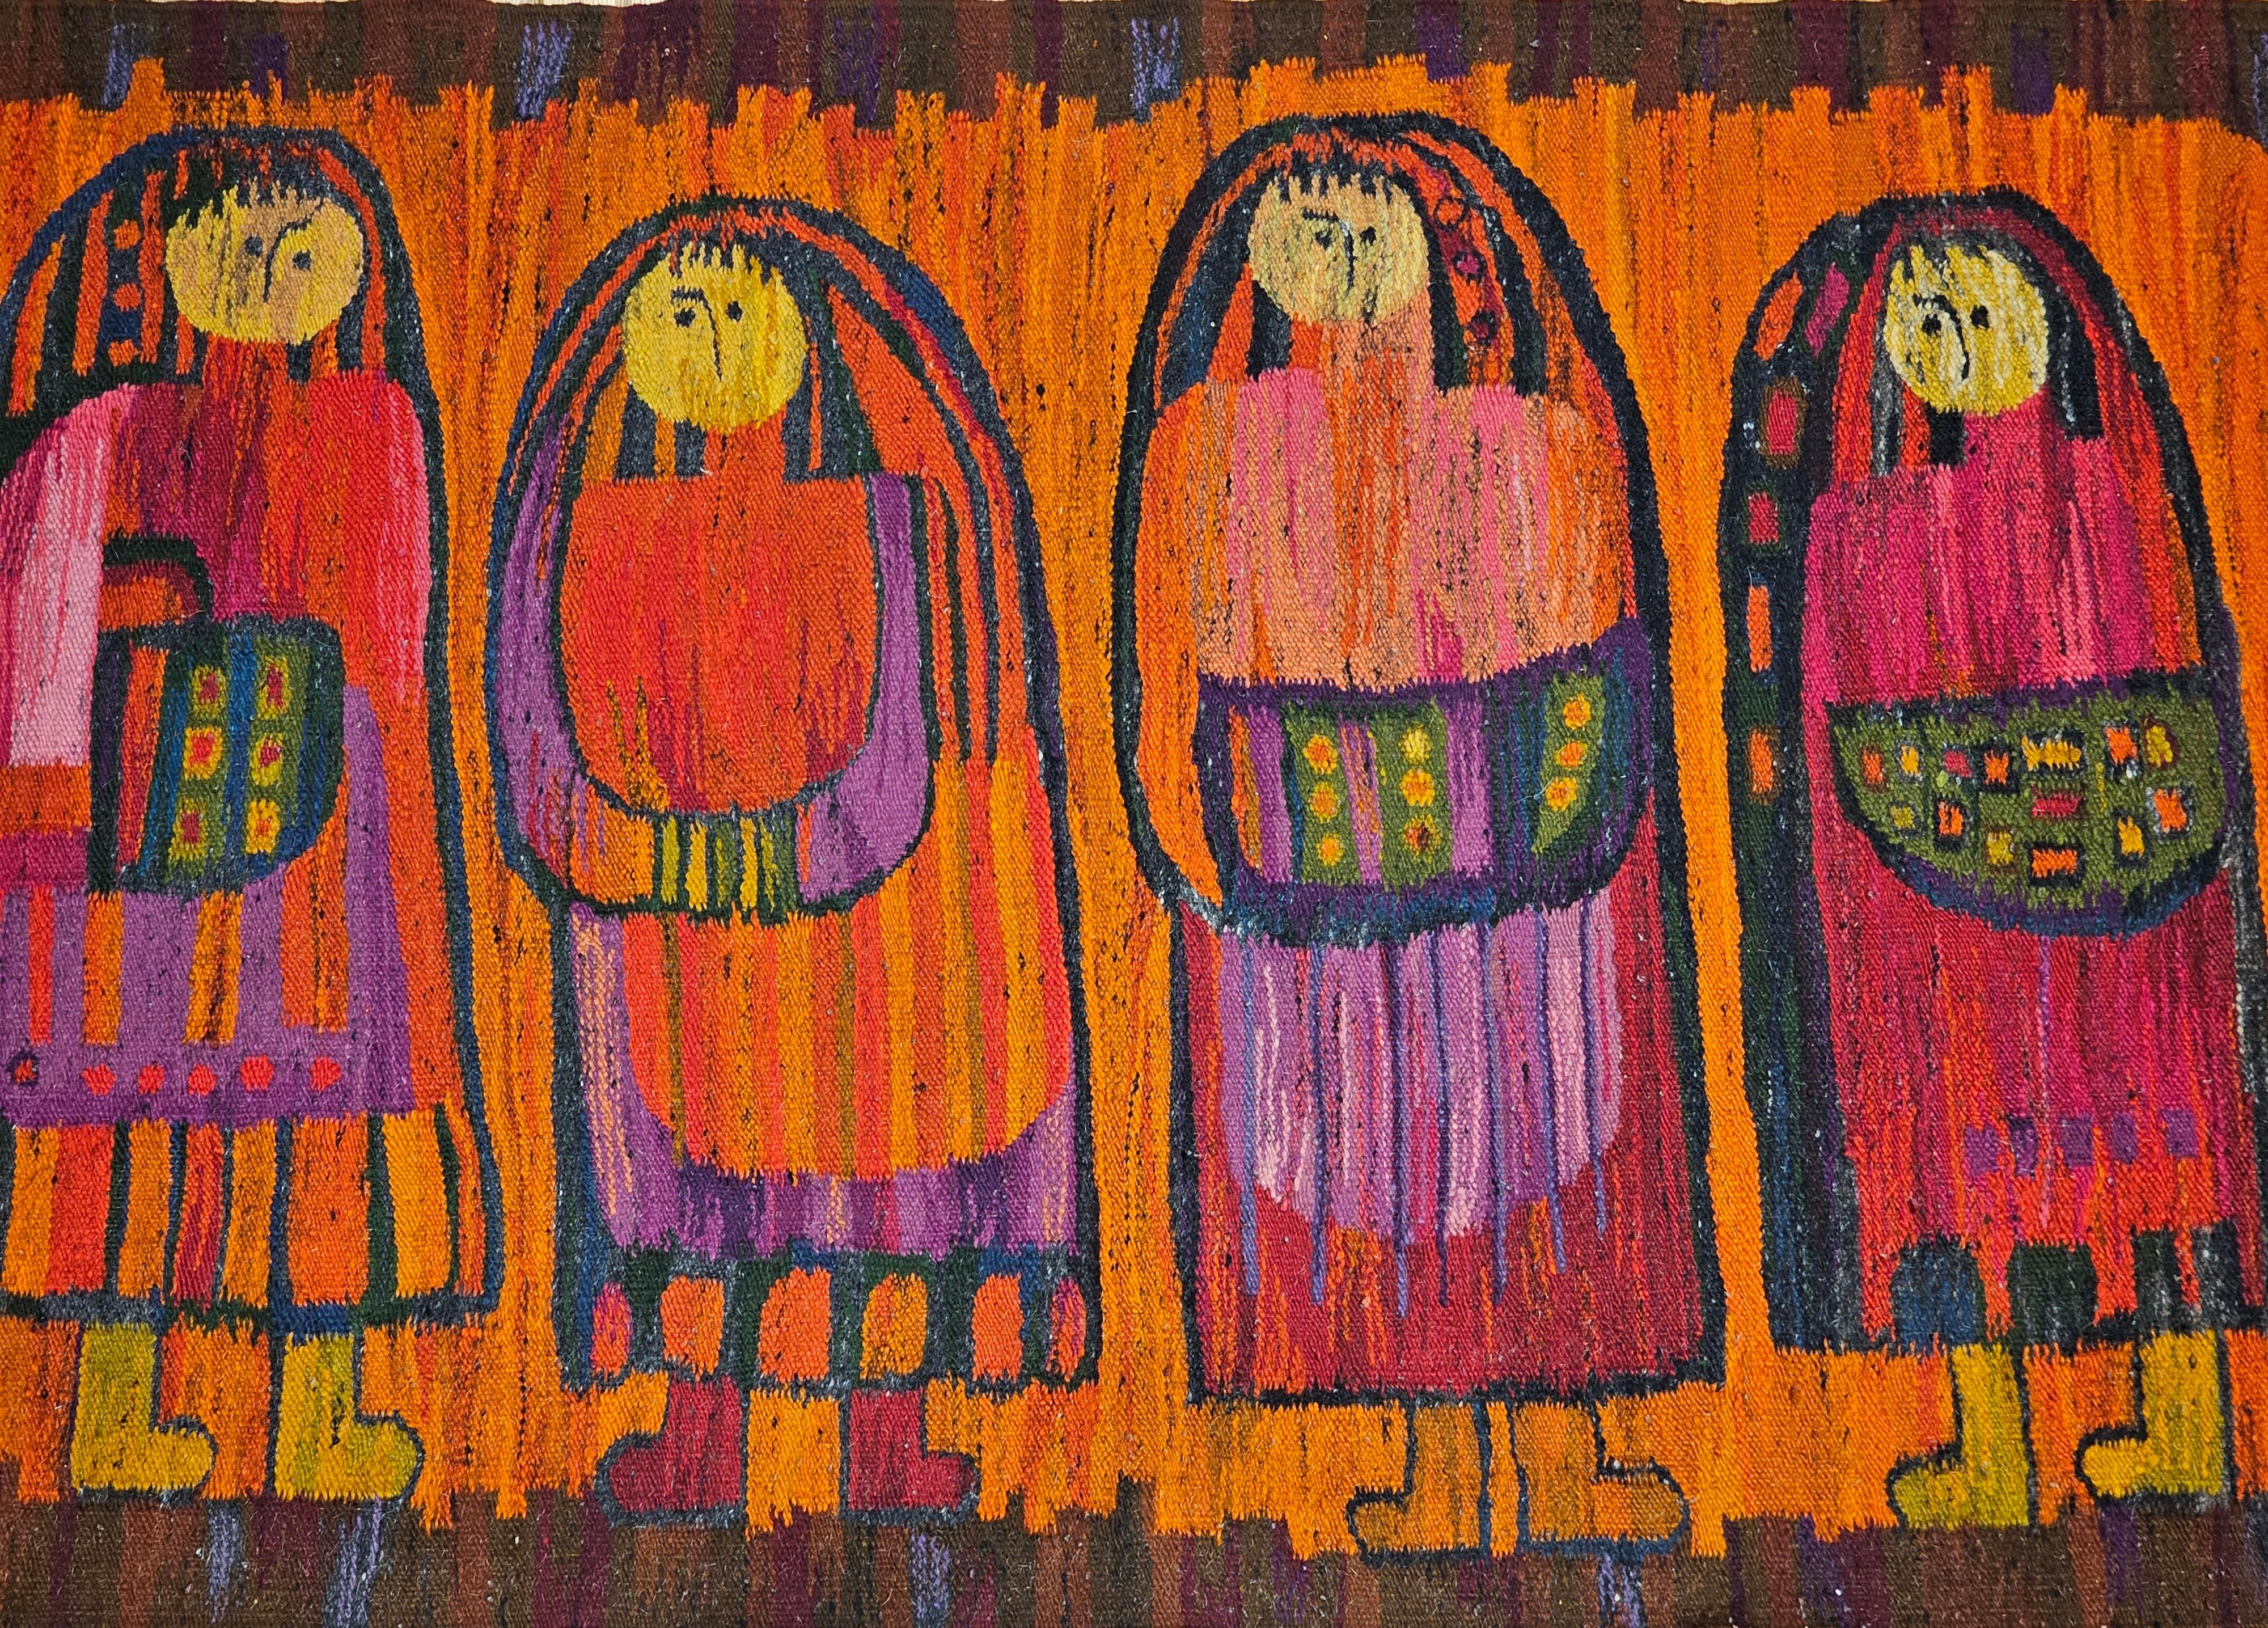 The Folkloric design tapestry depicting four young school girls in traditional dresses in brilliant “fall colors” of crimson, yellow, orange, lavender make this truly a unique vintage art piece.   Looking at the tapestry's unique design and the use